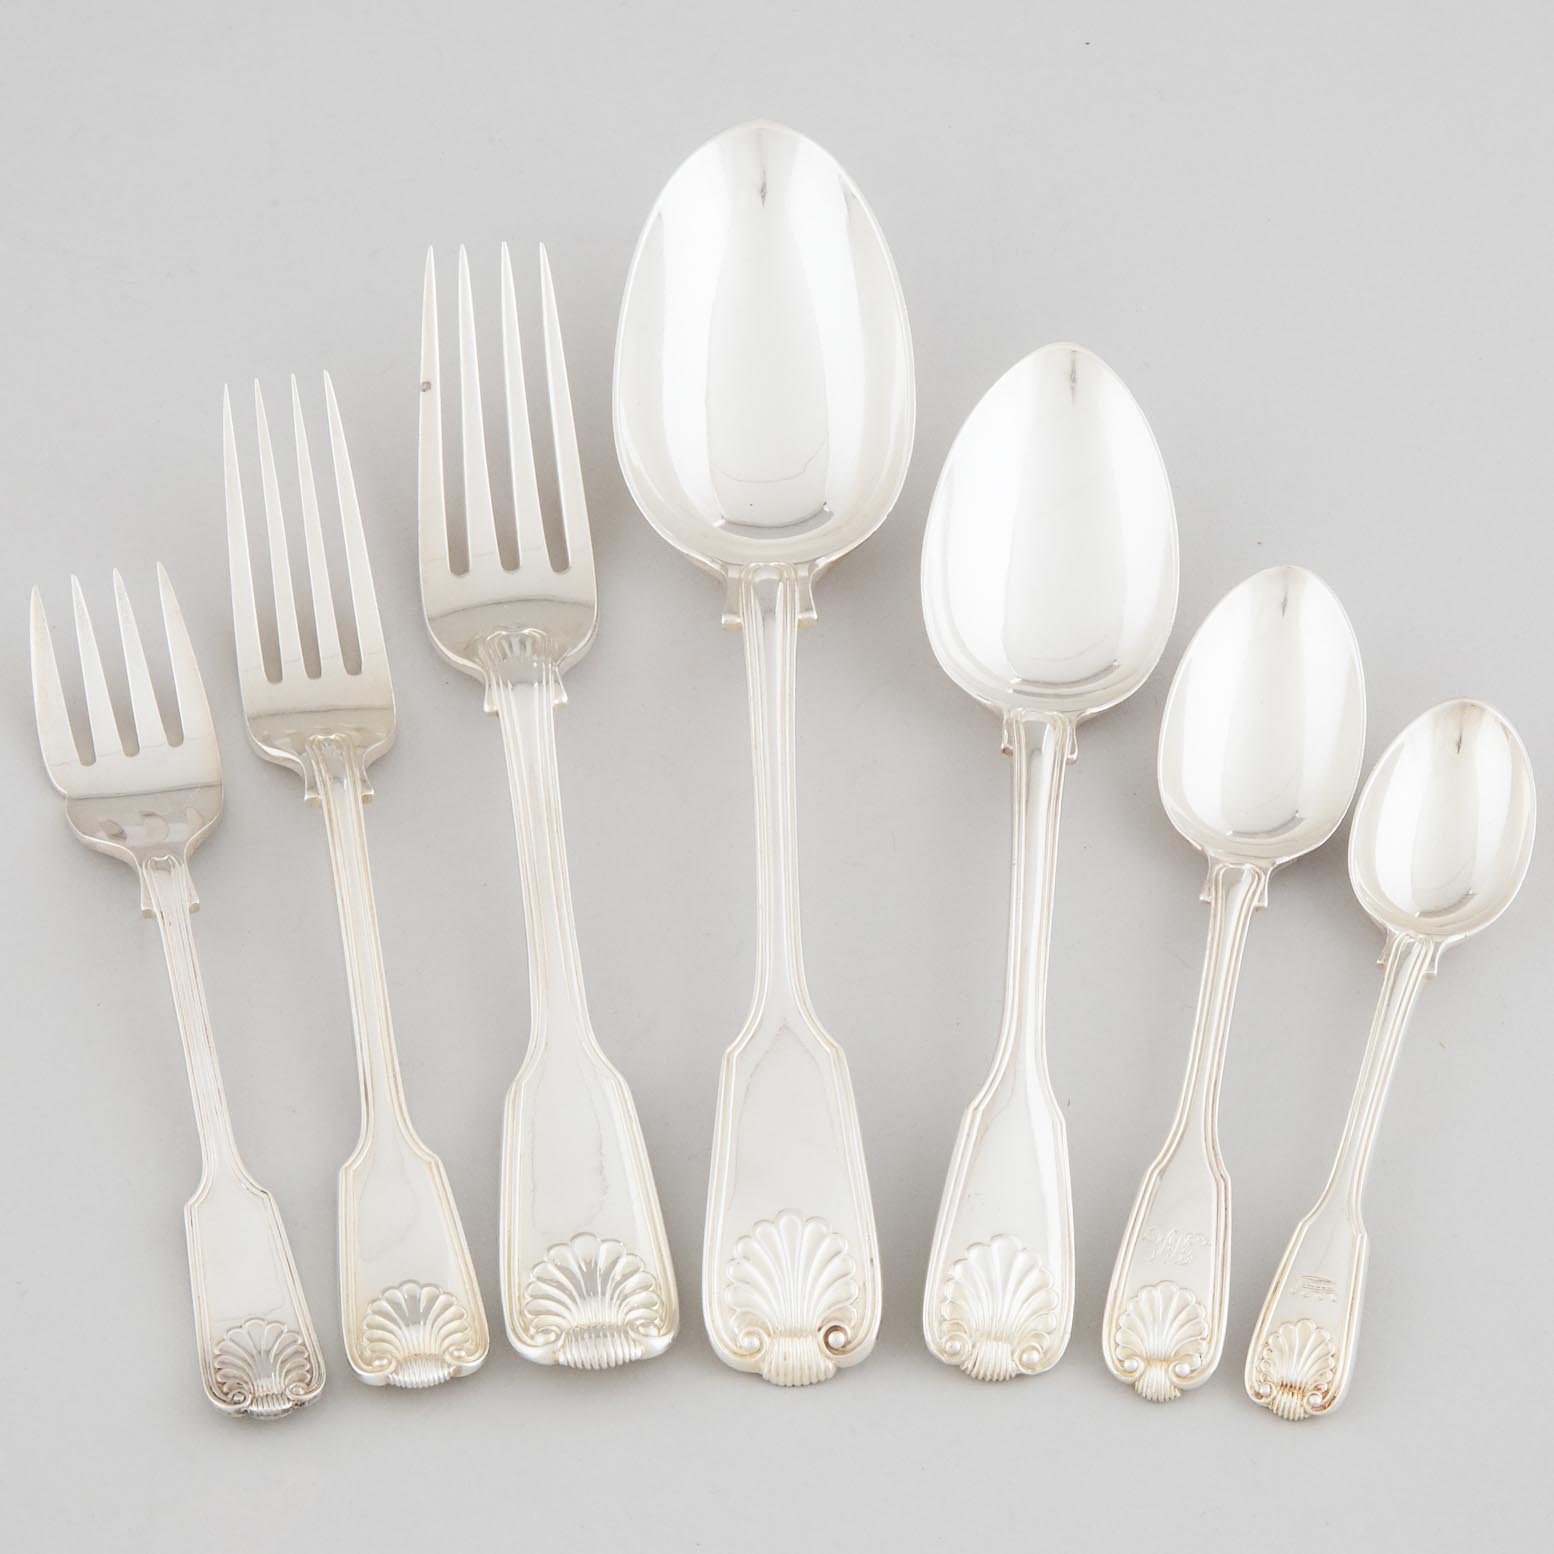 Assembled William IV and Victorian Silver Fiddle, Thread and Shell Pattern Flatware Service, London, 1823-71